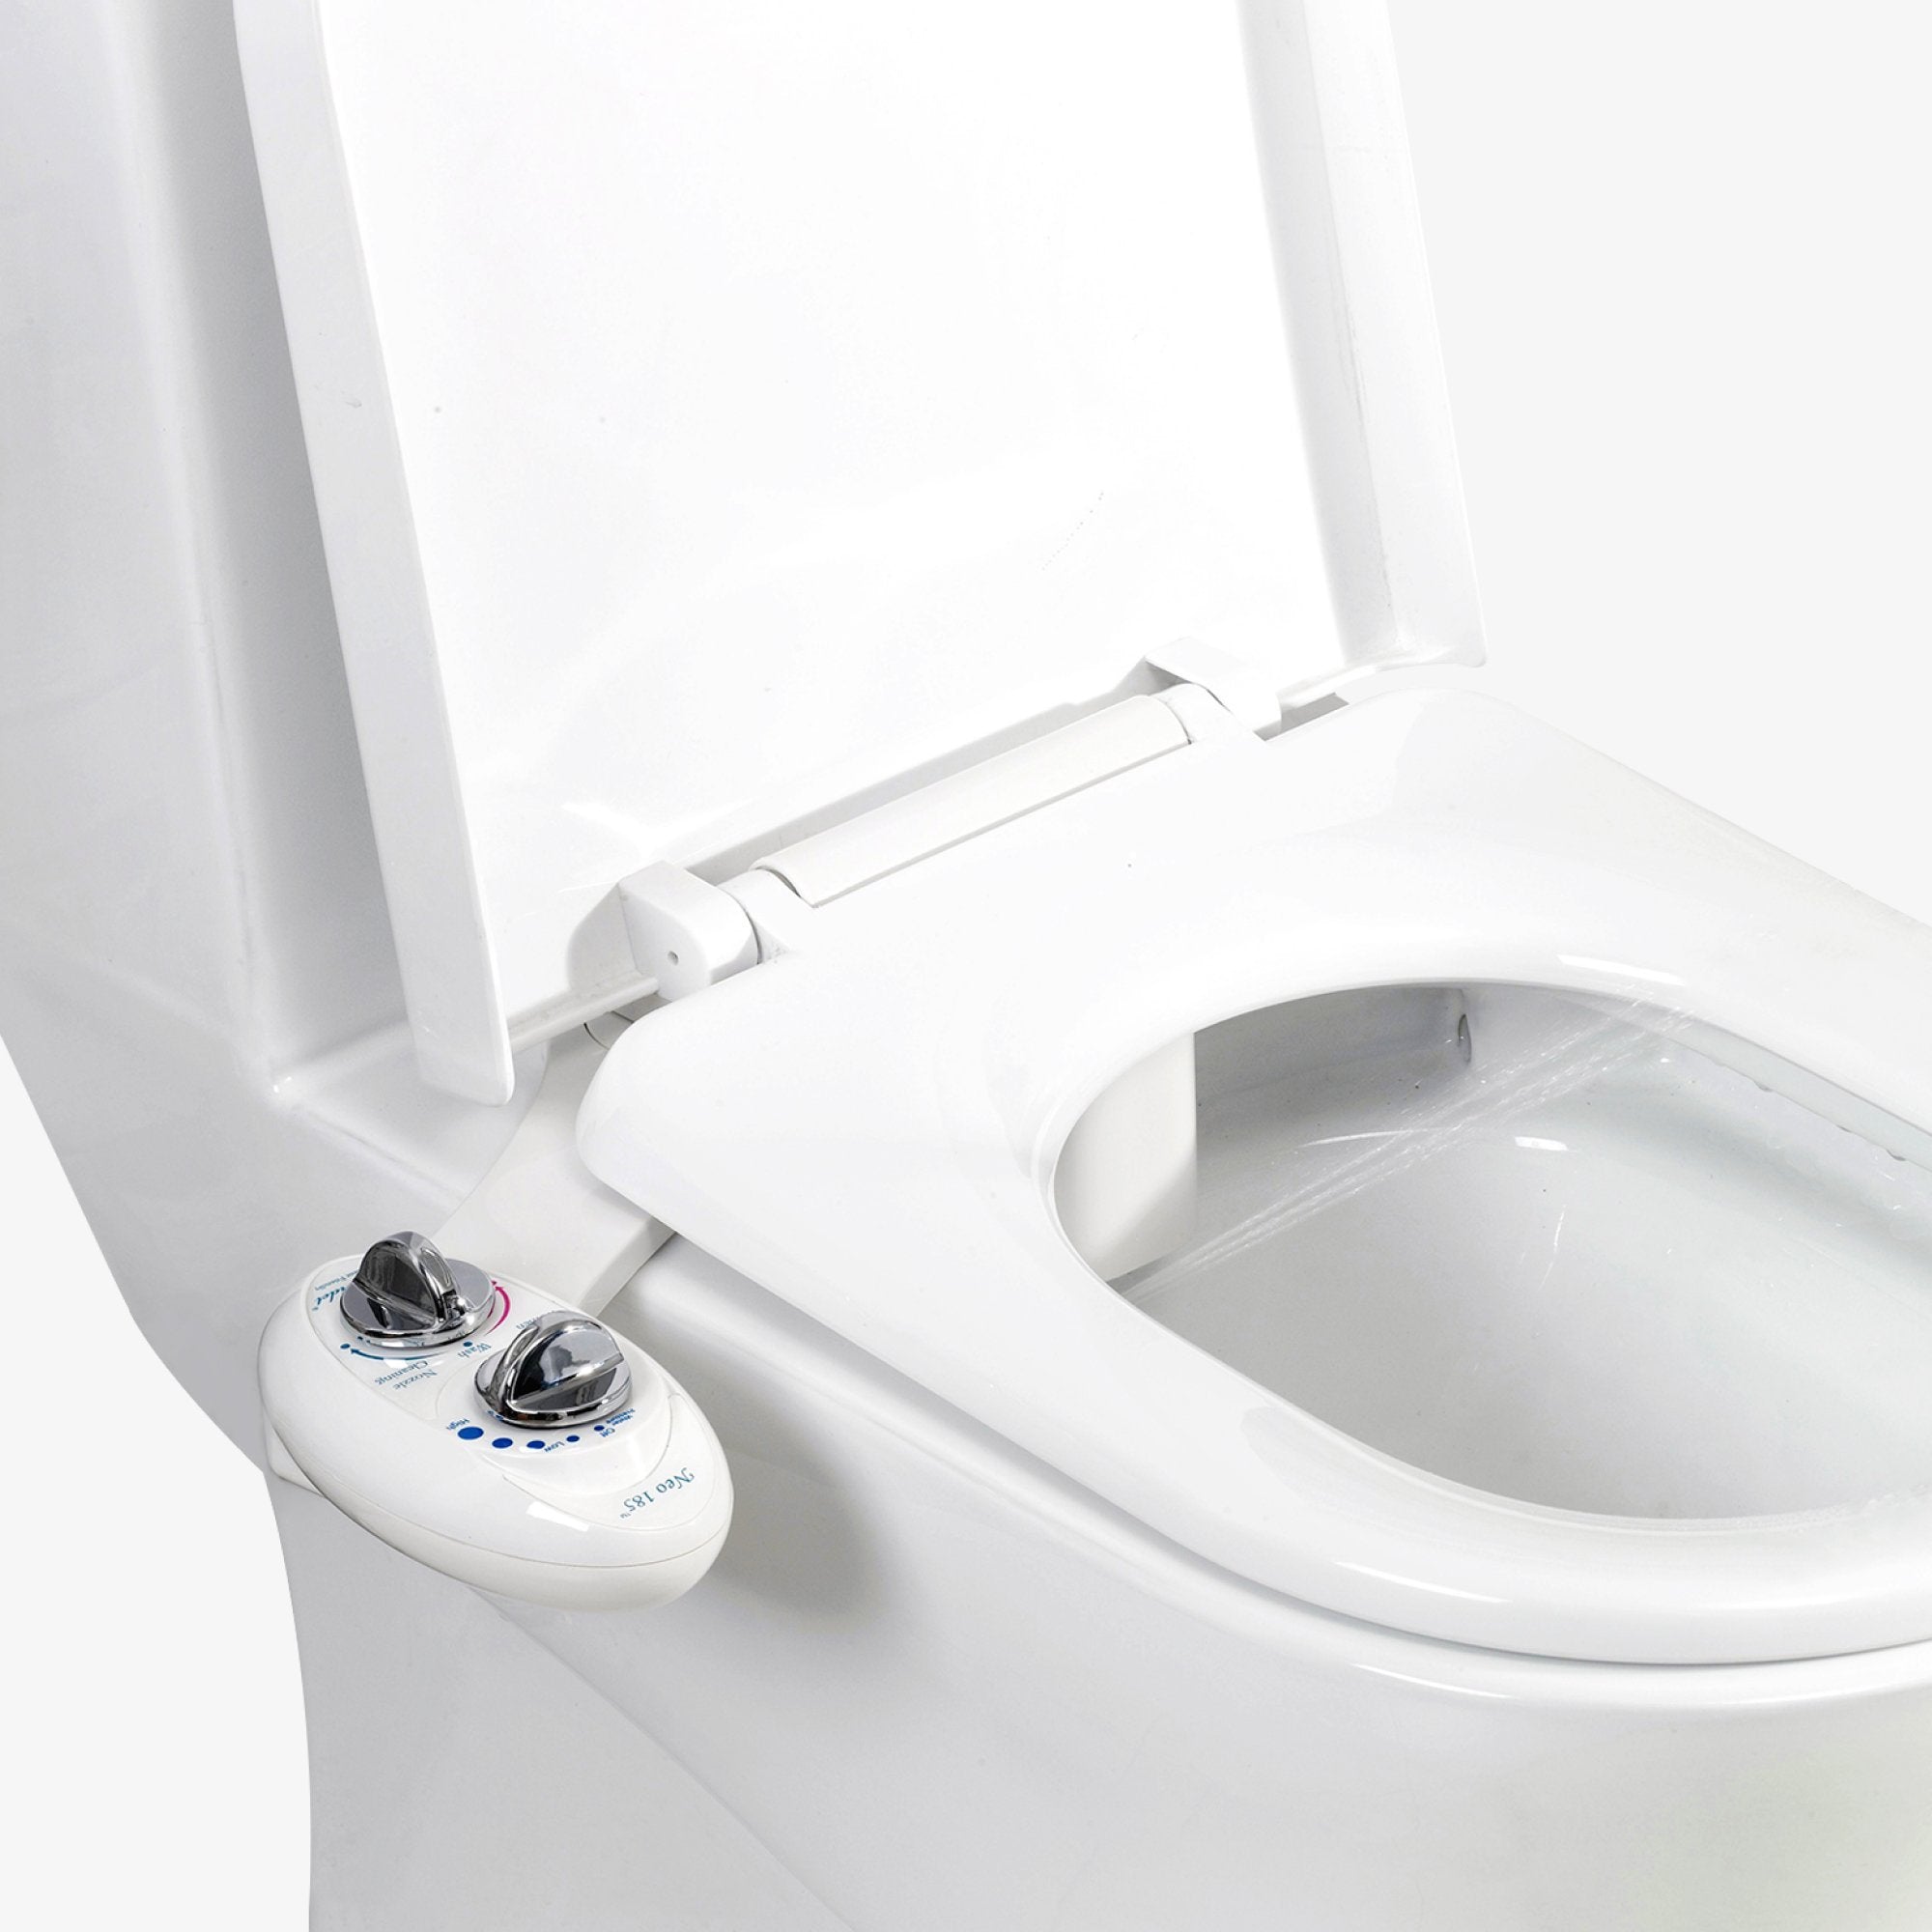 NEO 185 White installed on a toilet with water spraying from nozzles